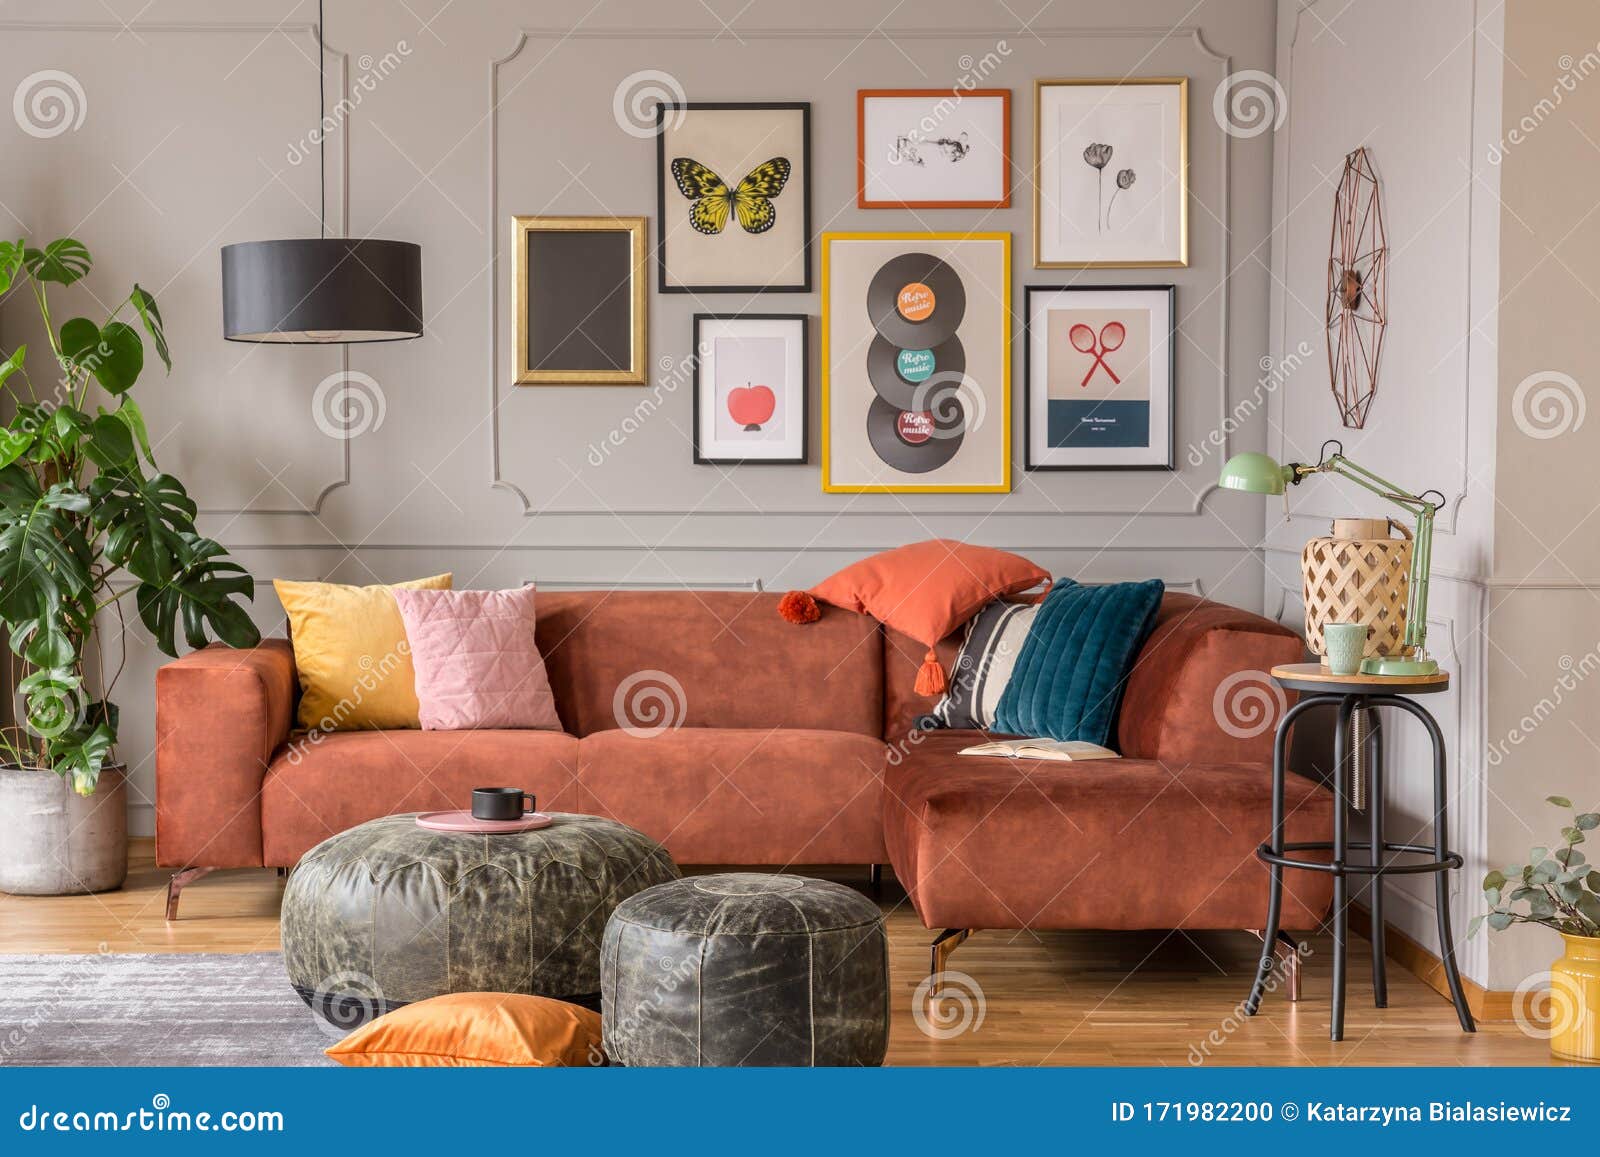 vintage black poufs in trendy eclectic living room interior with brown couch